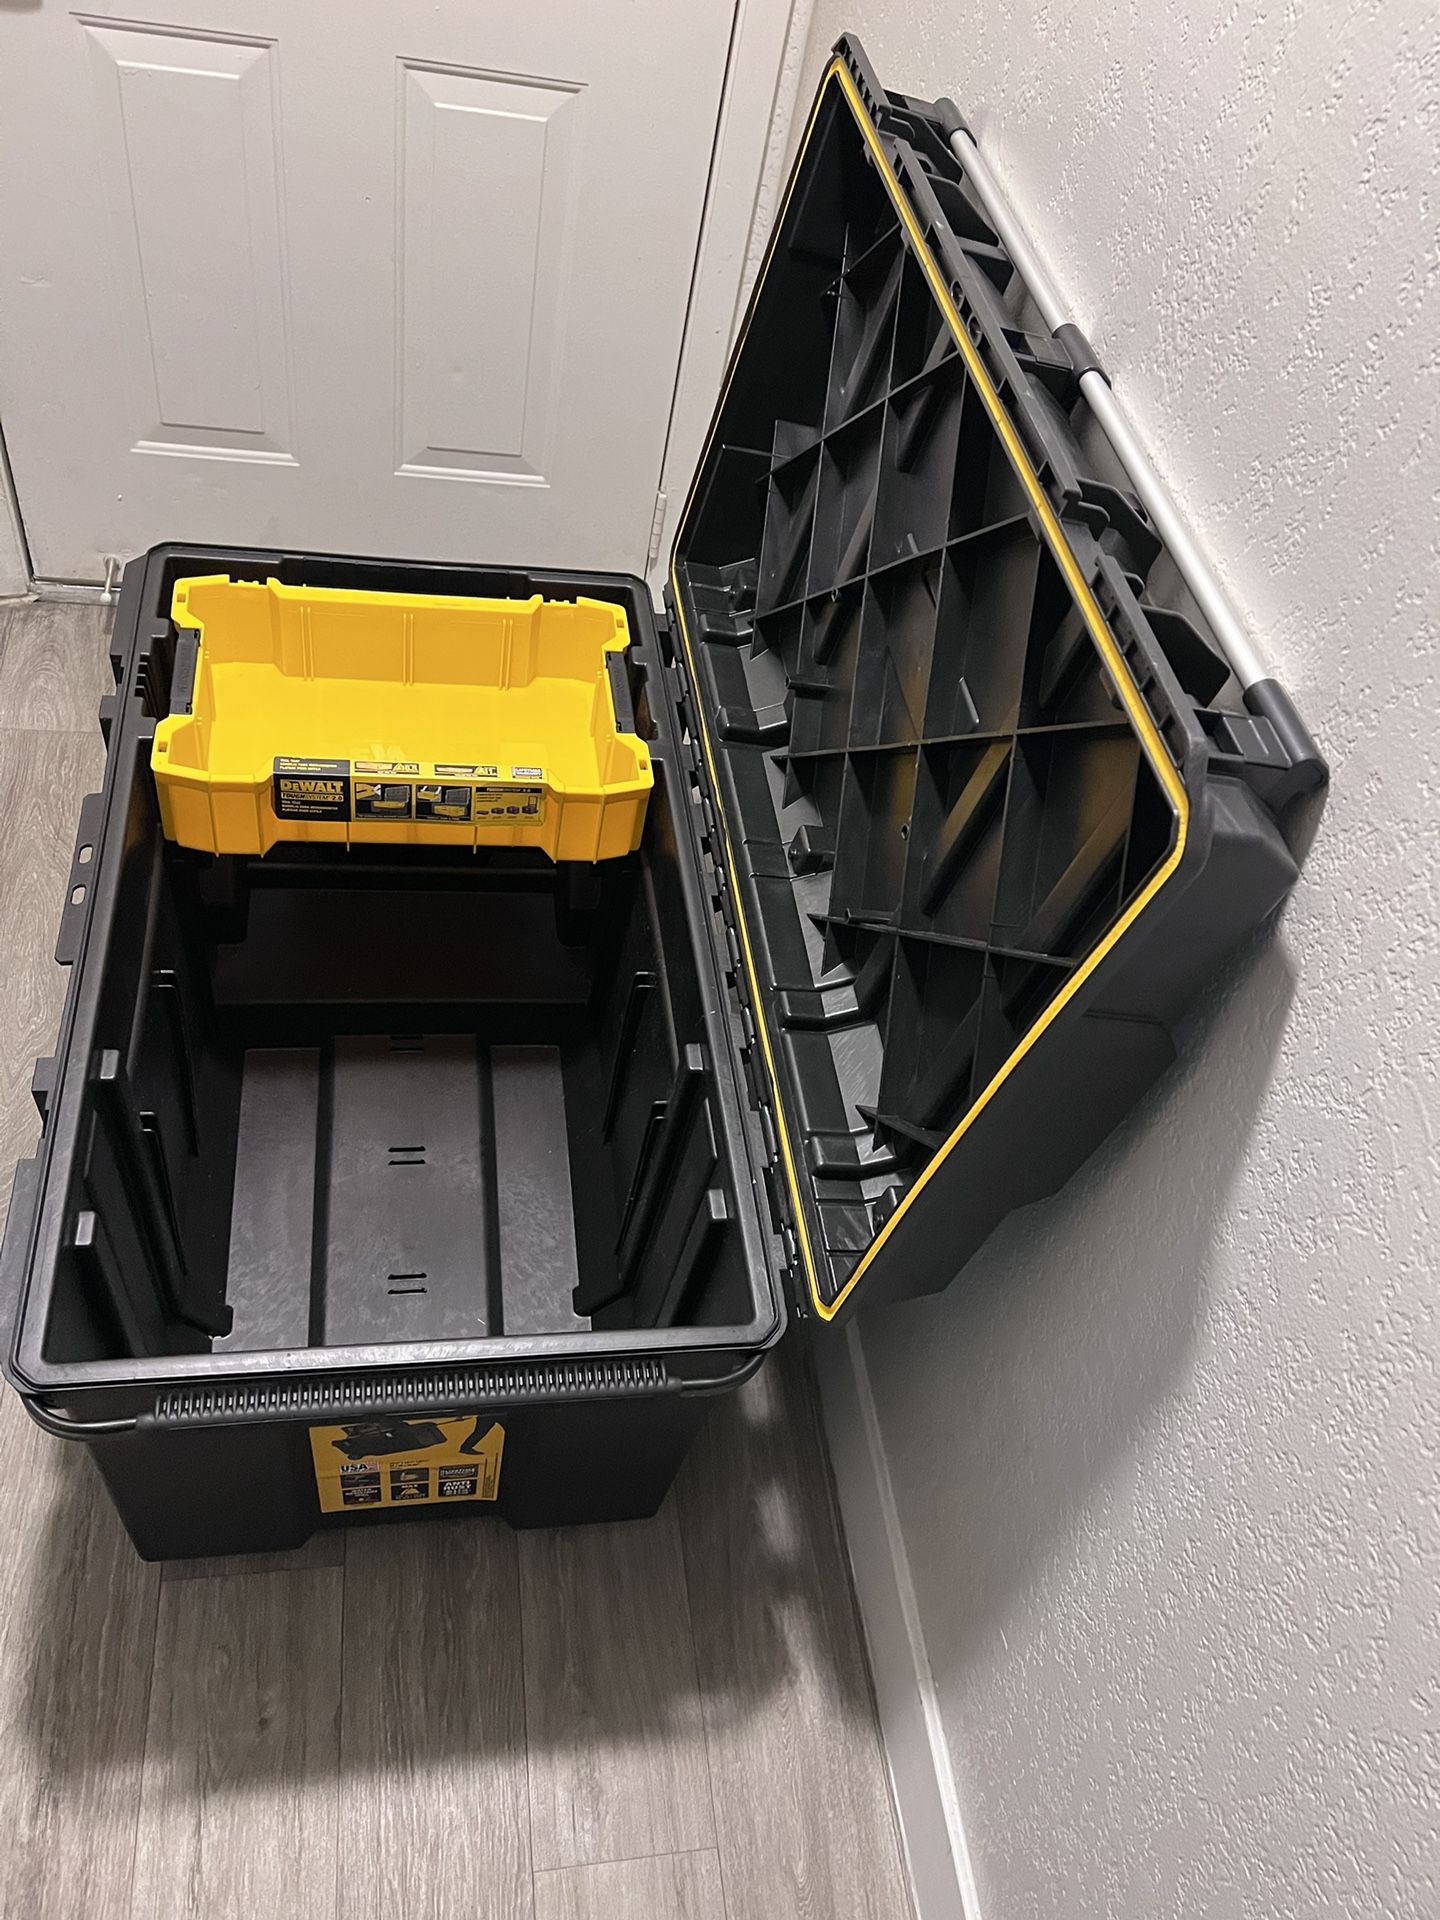 DEWALT Tough System 2.0 Tower Tool Box System for Sale in Tucker, GA -  OfferUp